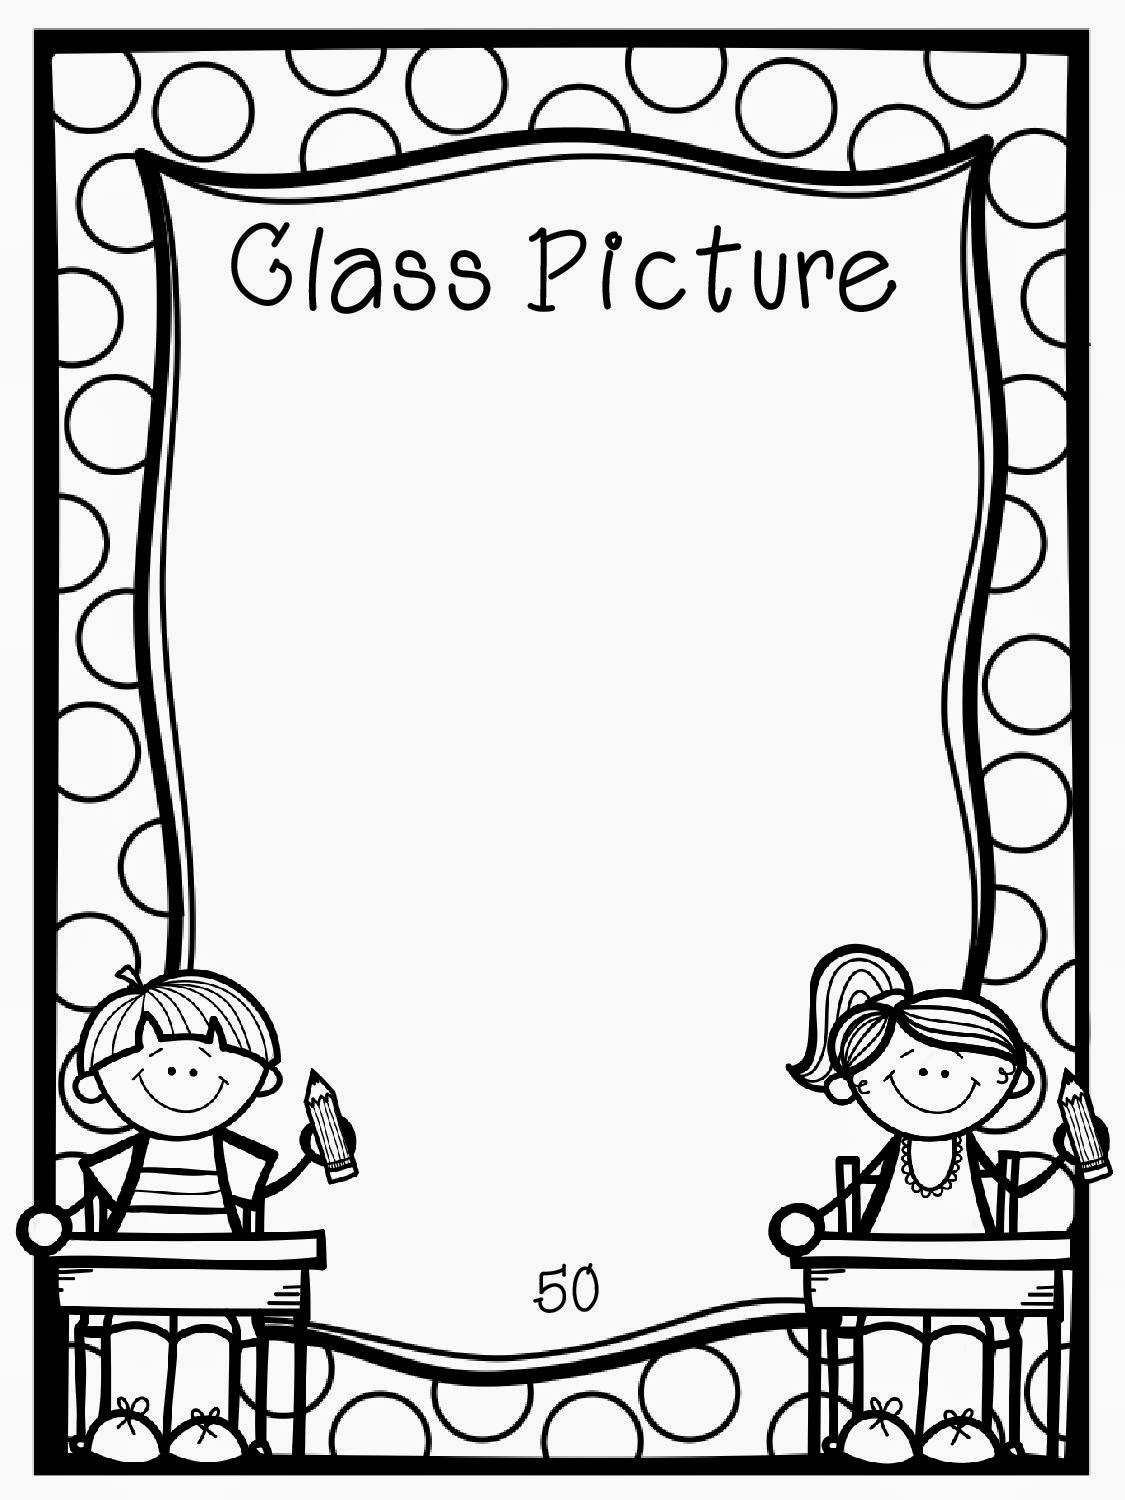 Wimpy Kid Coloring Pages 28 Images Diary Page